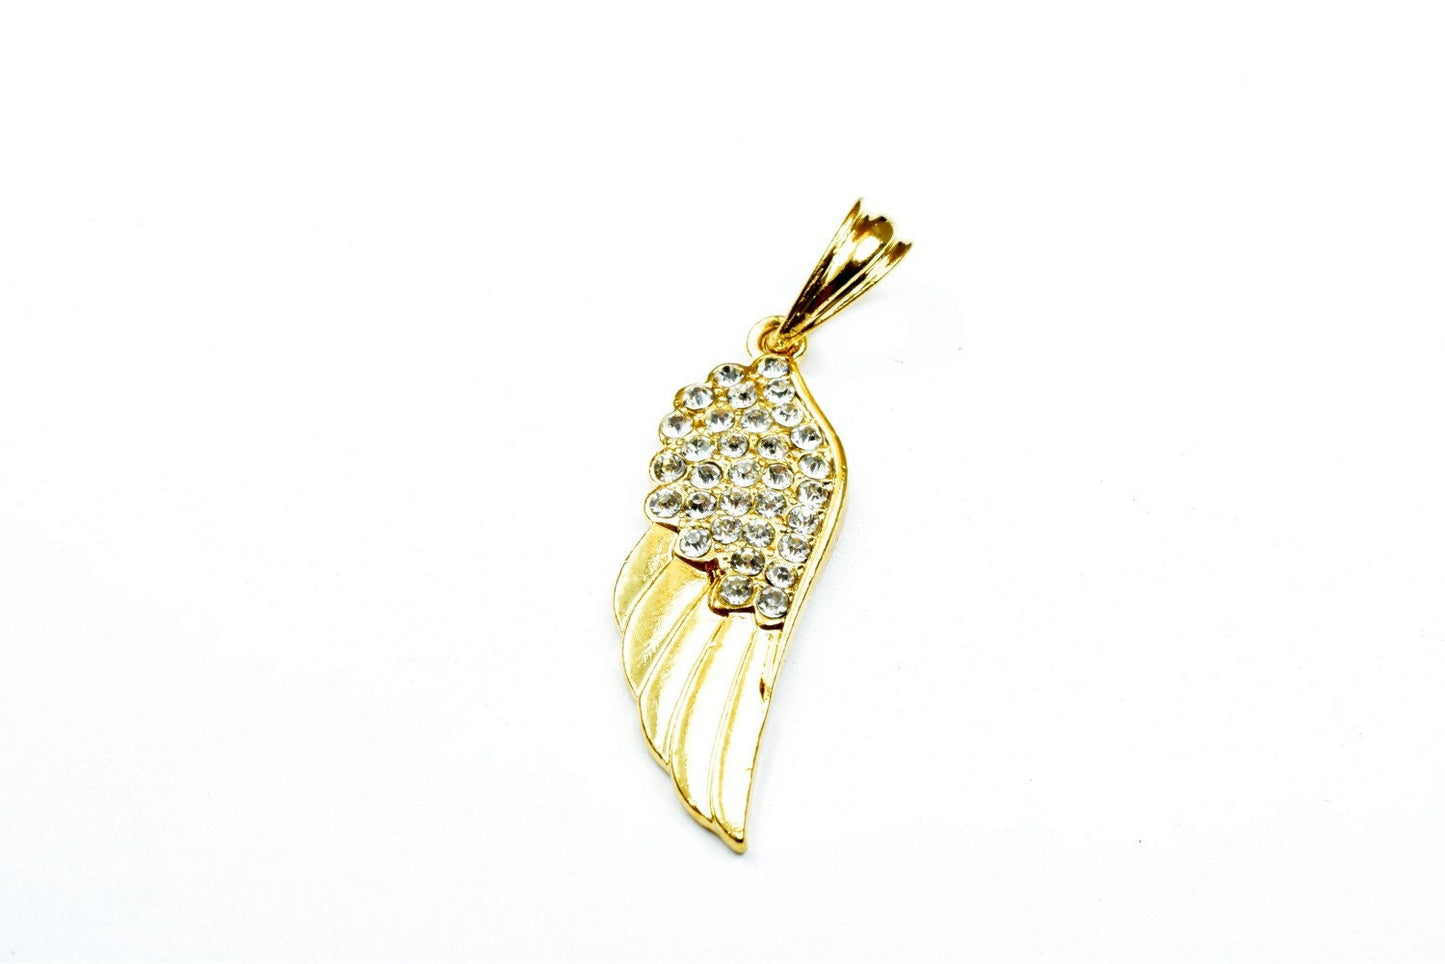 18K as Gold Filled tarnish resistant Rhinestone Wing Charm Pendant Size 38x13mm Charm with Clear CZ Cubic Zirconia For Jewelry Making GP139